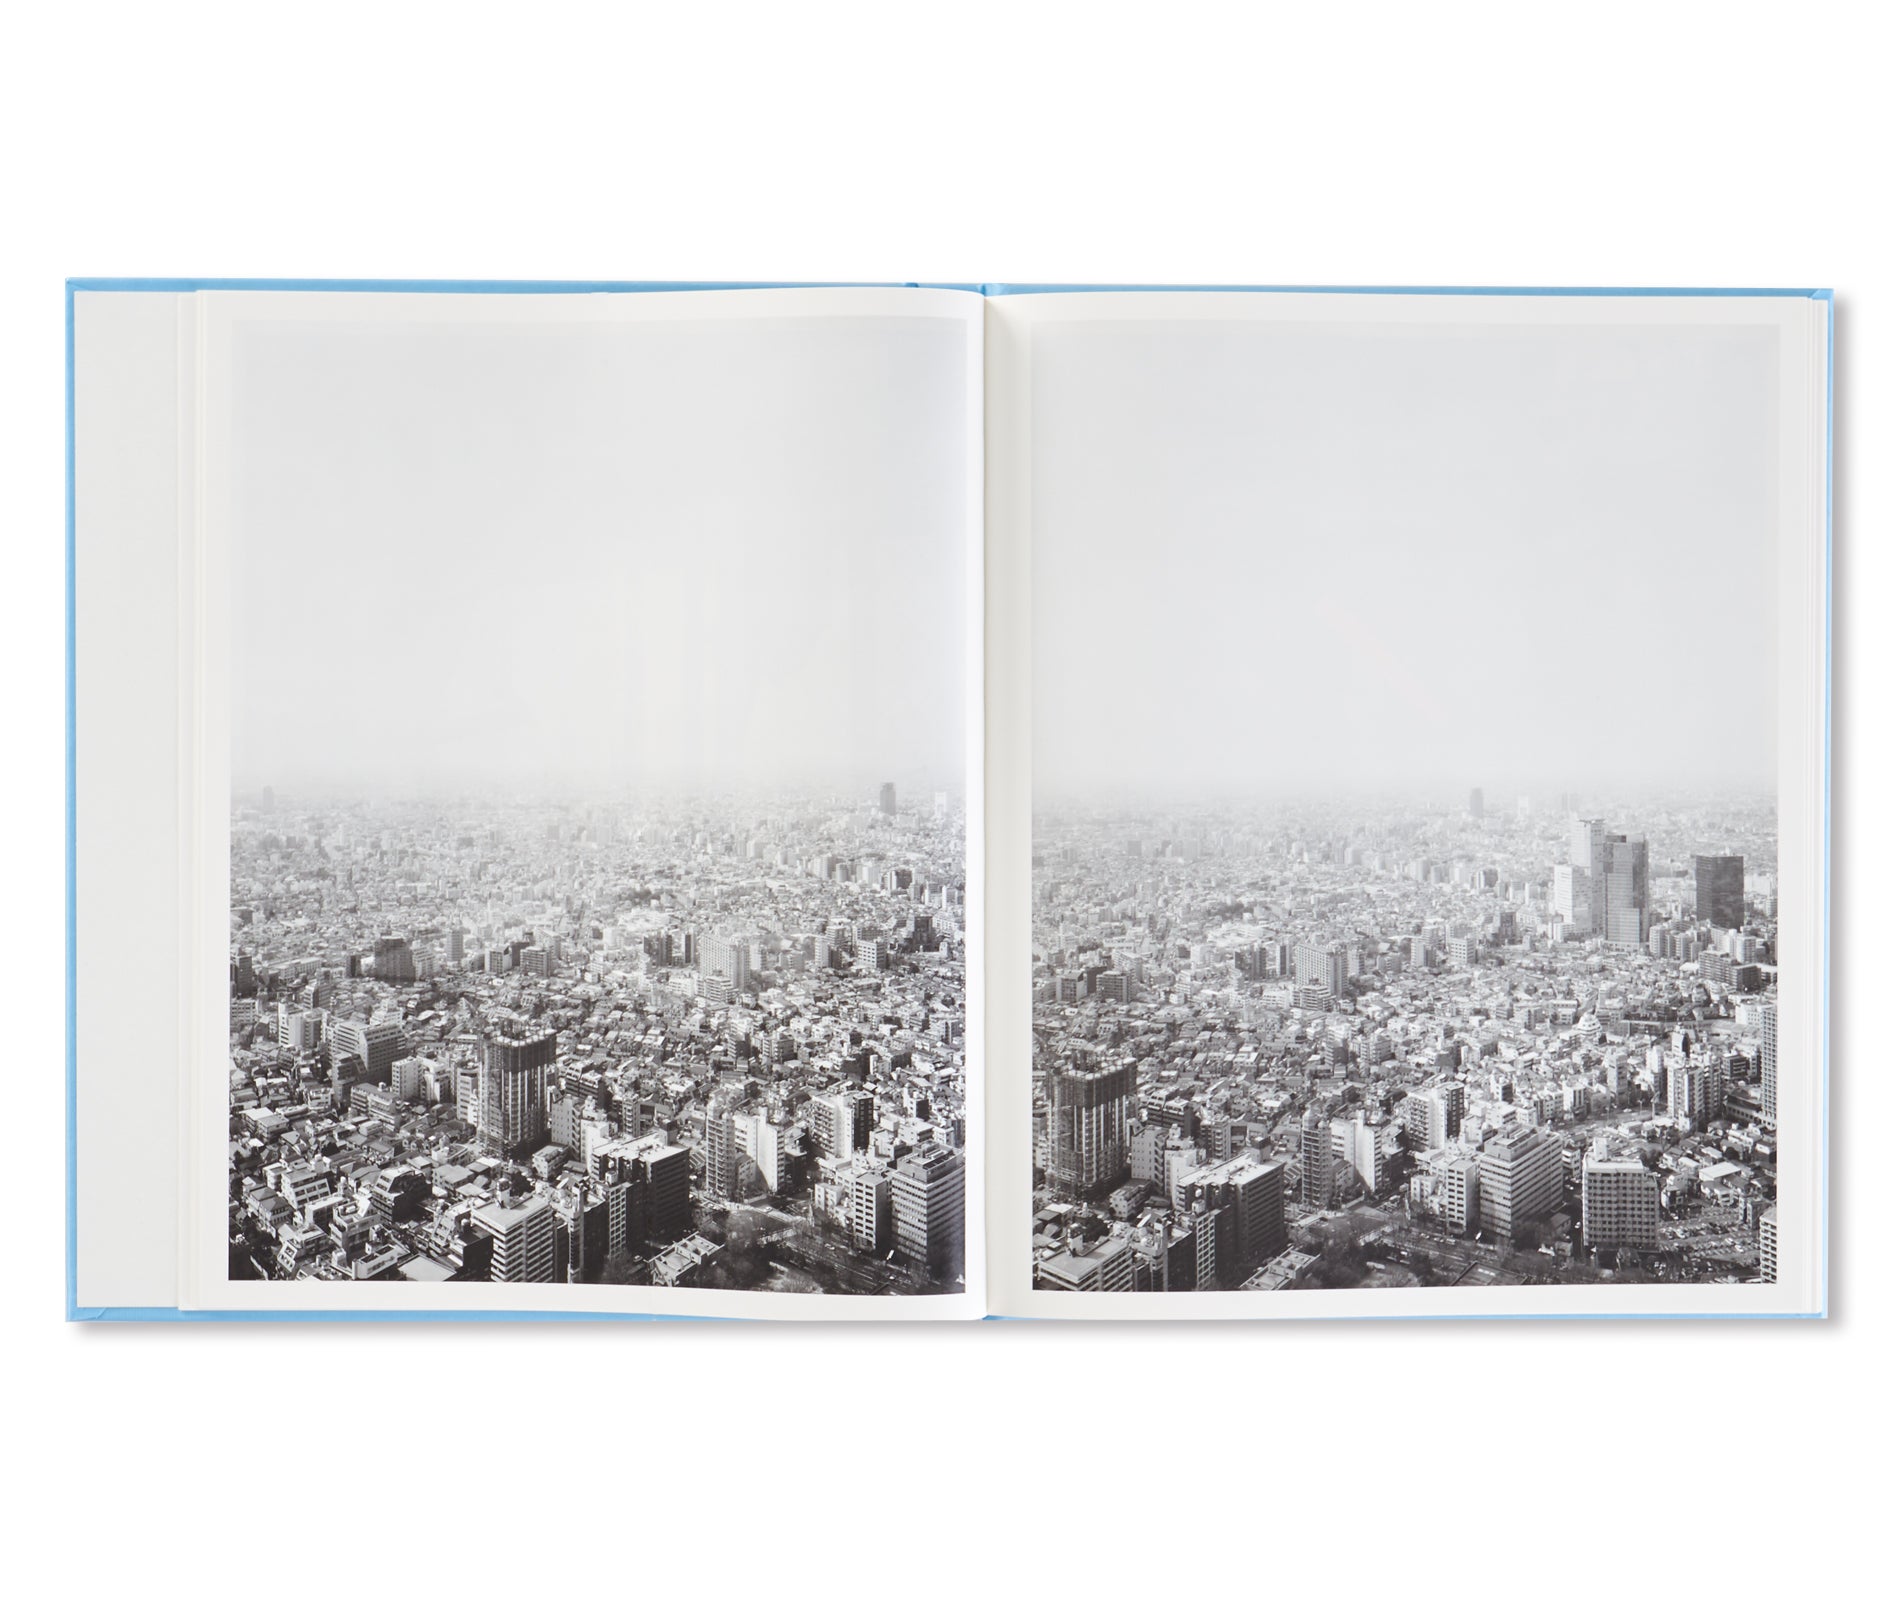 TOKYO by Gerry Johansson [SIGNED]